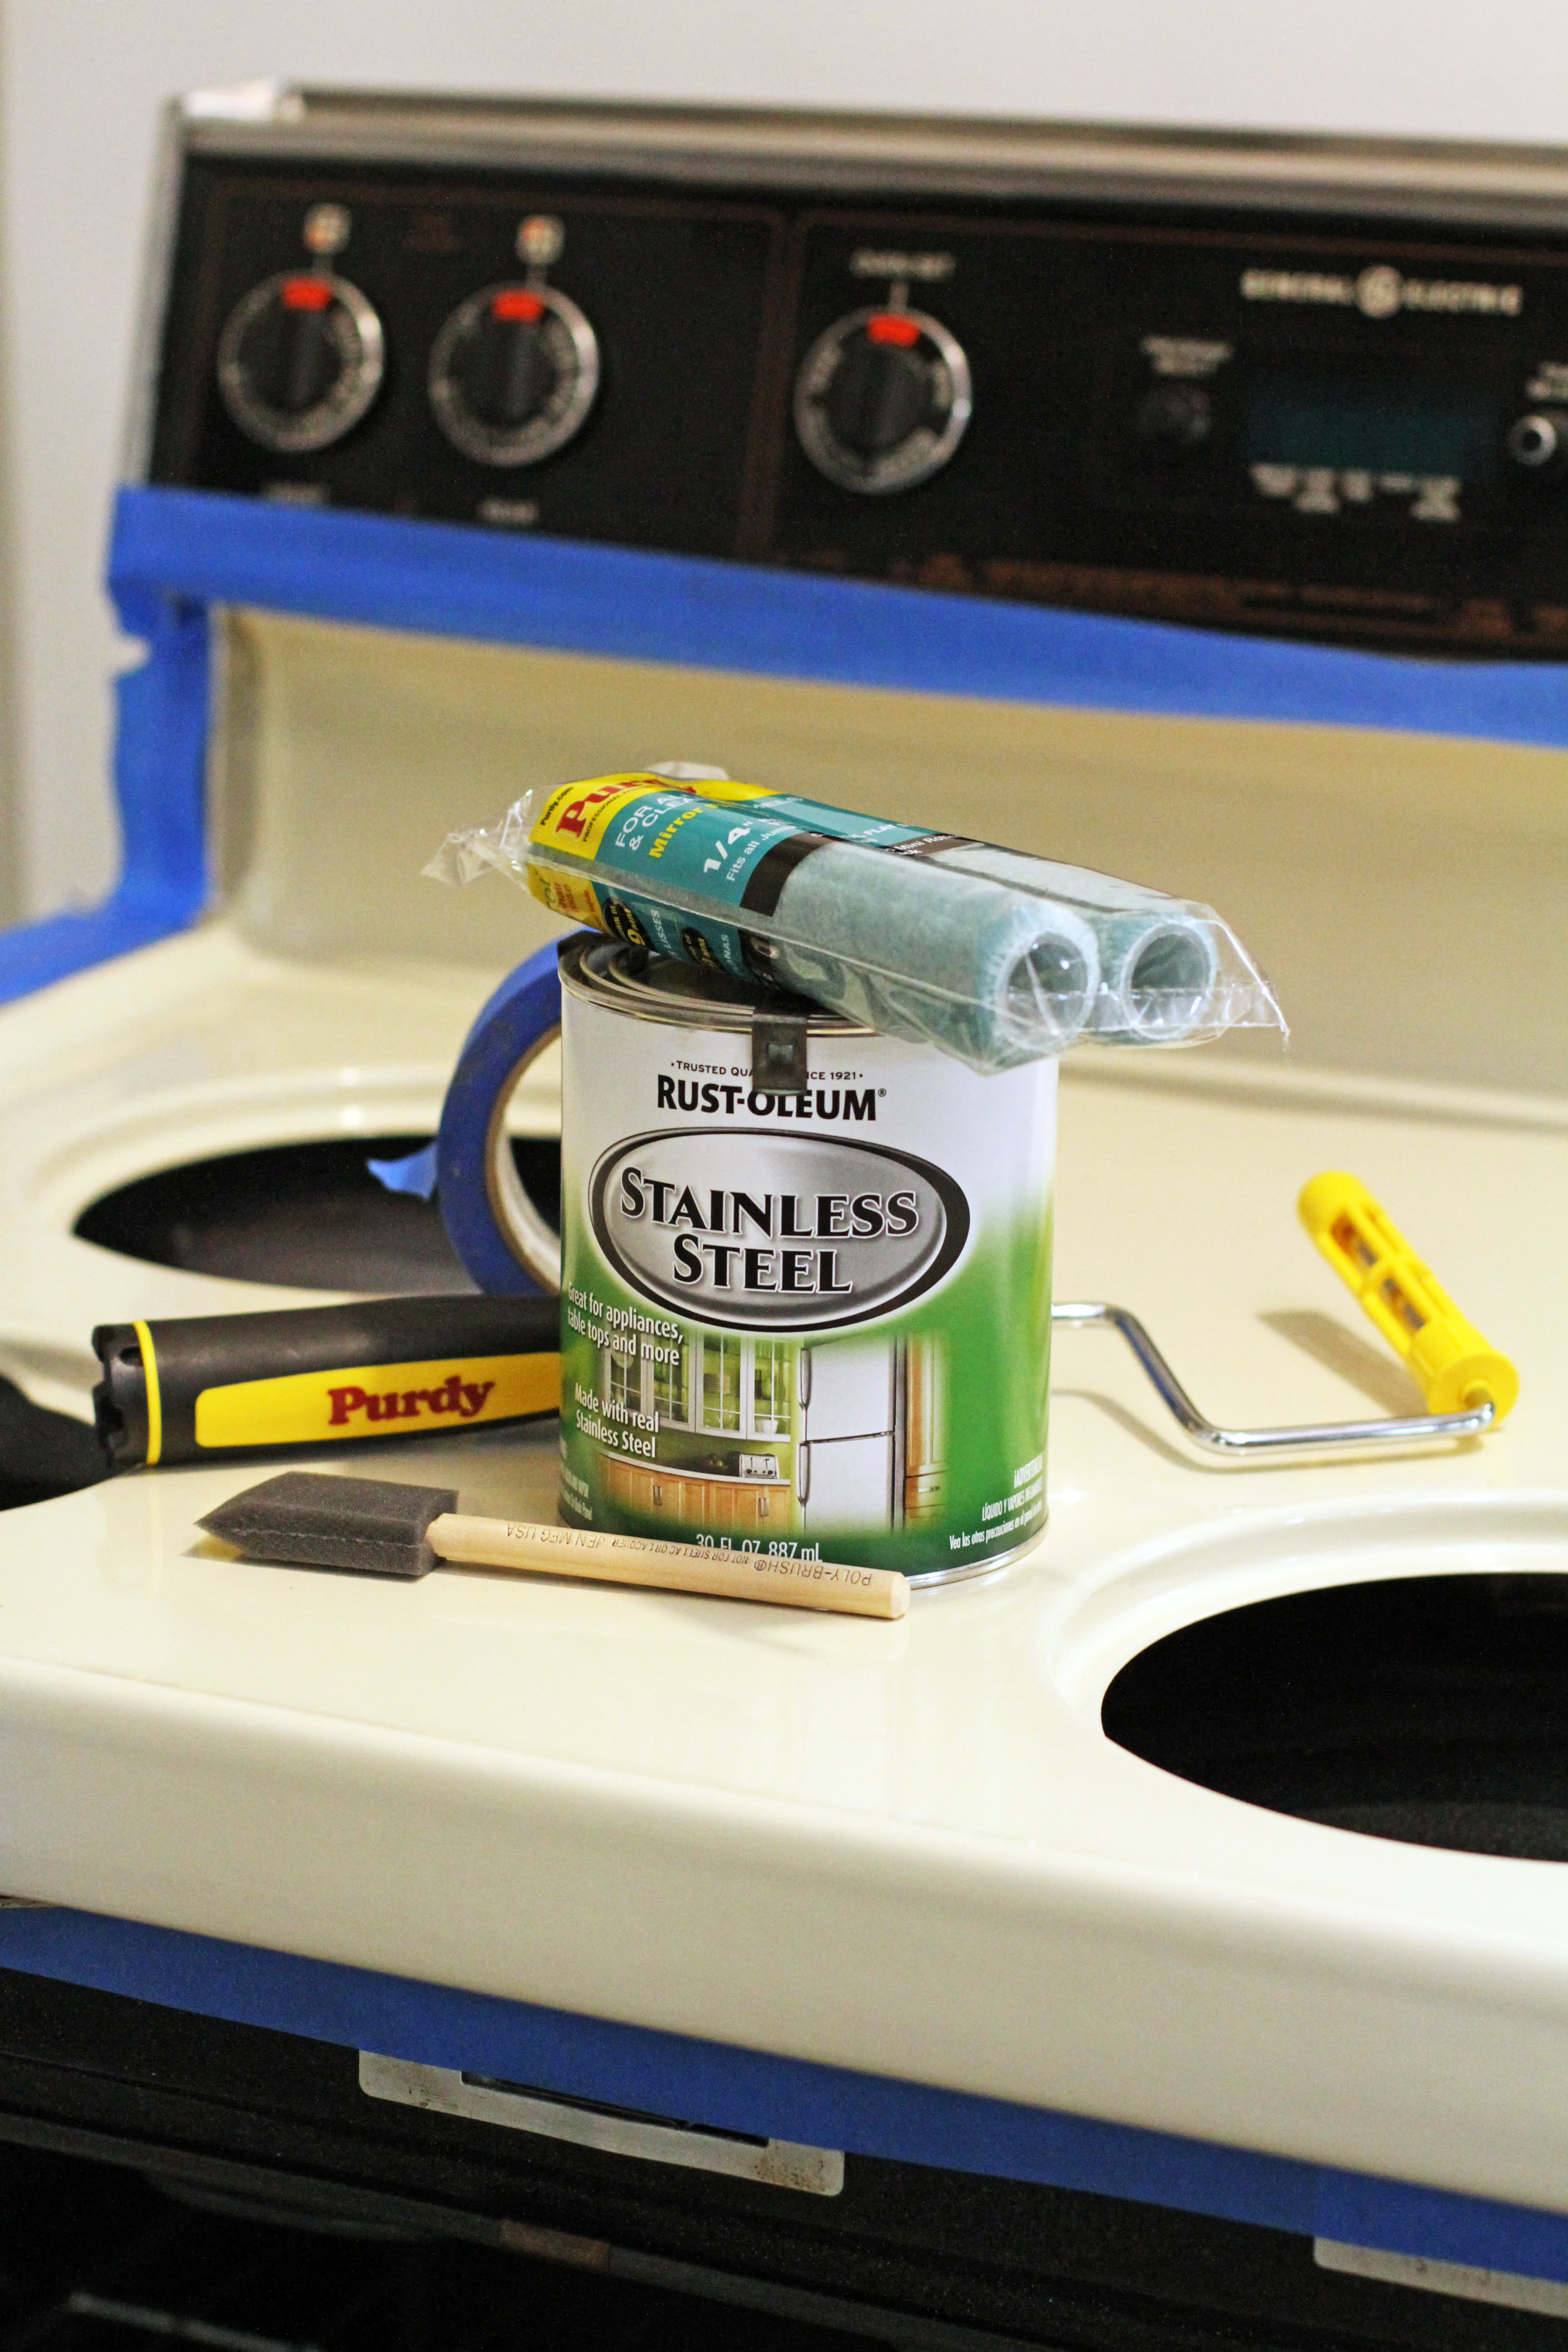 How To Paint Appliances Stainless Steel - The Honeycomb Home